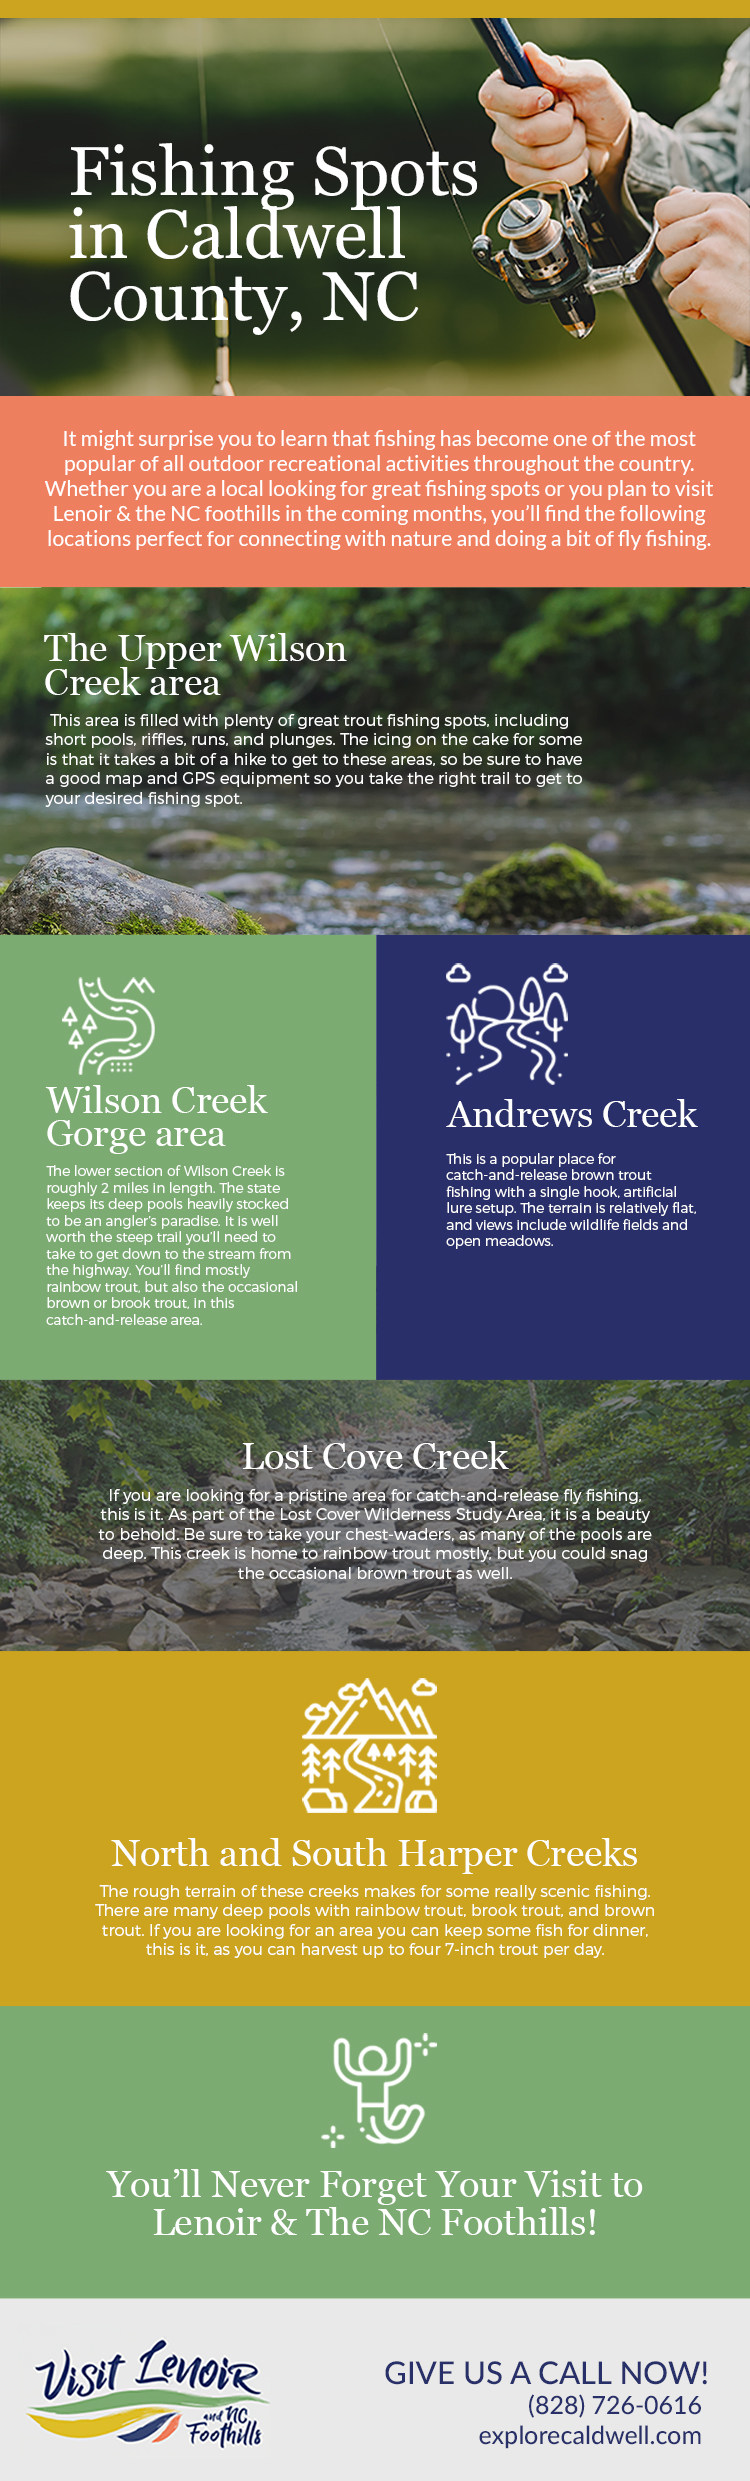 Fishing Spots in Caldwell County, NC [infographic]